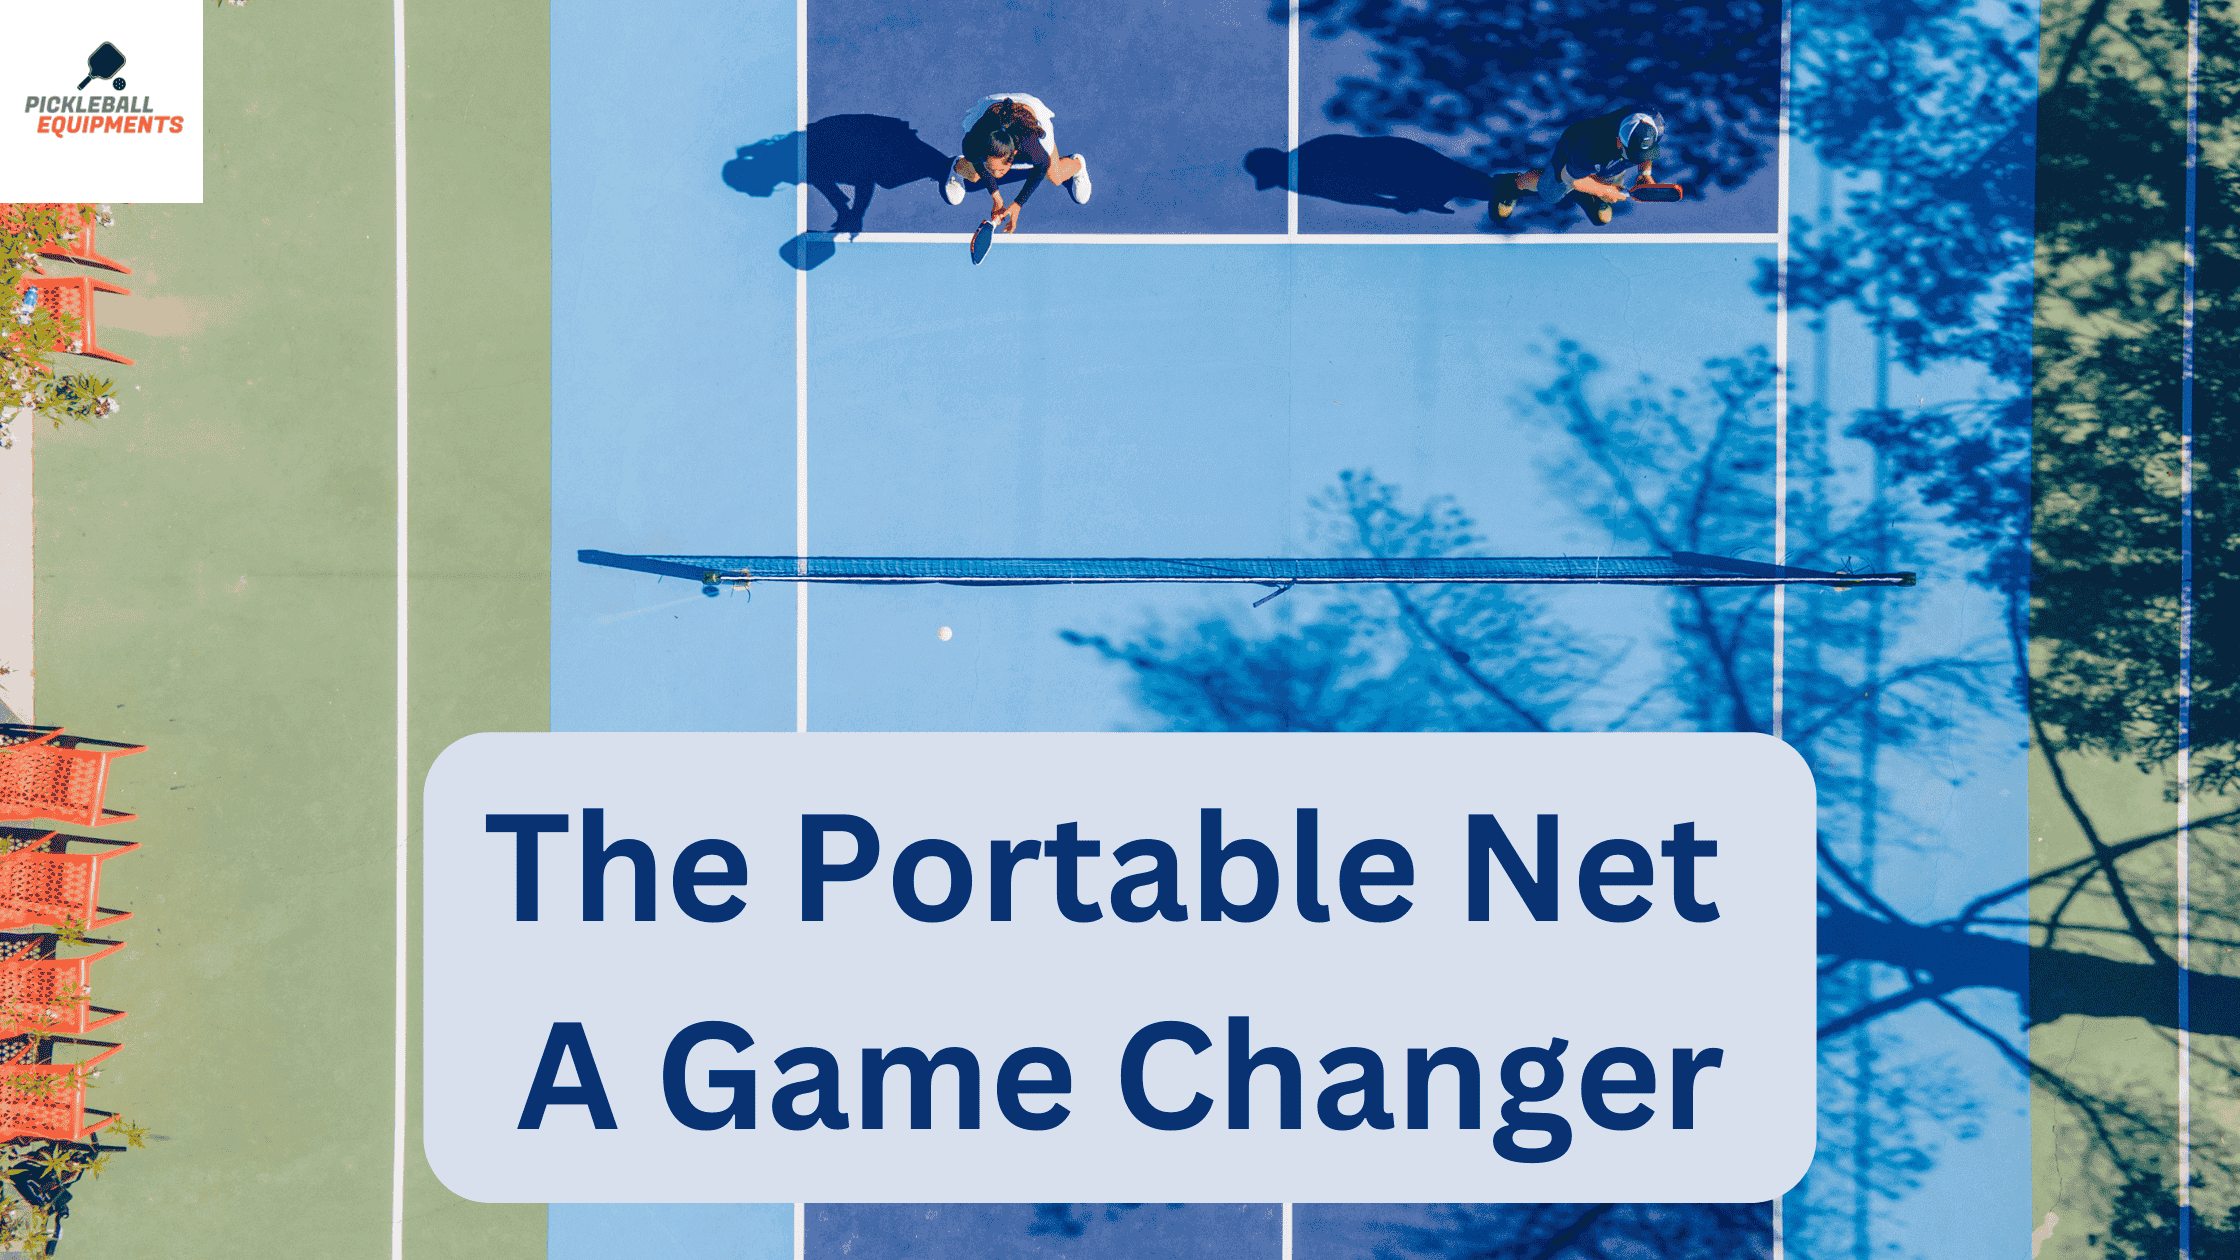 The Portable Net A Game Changer